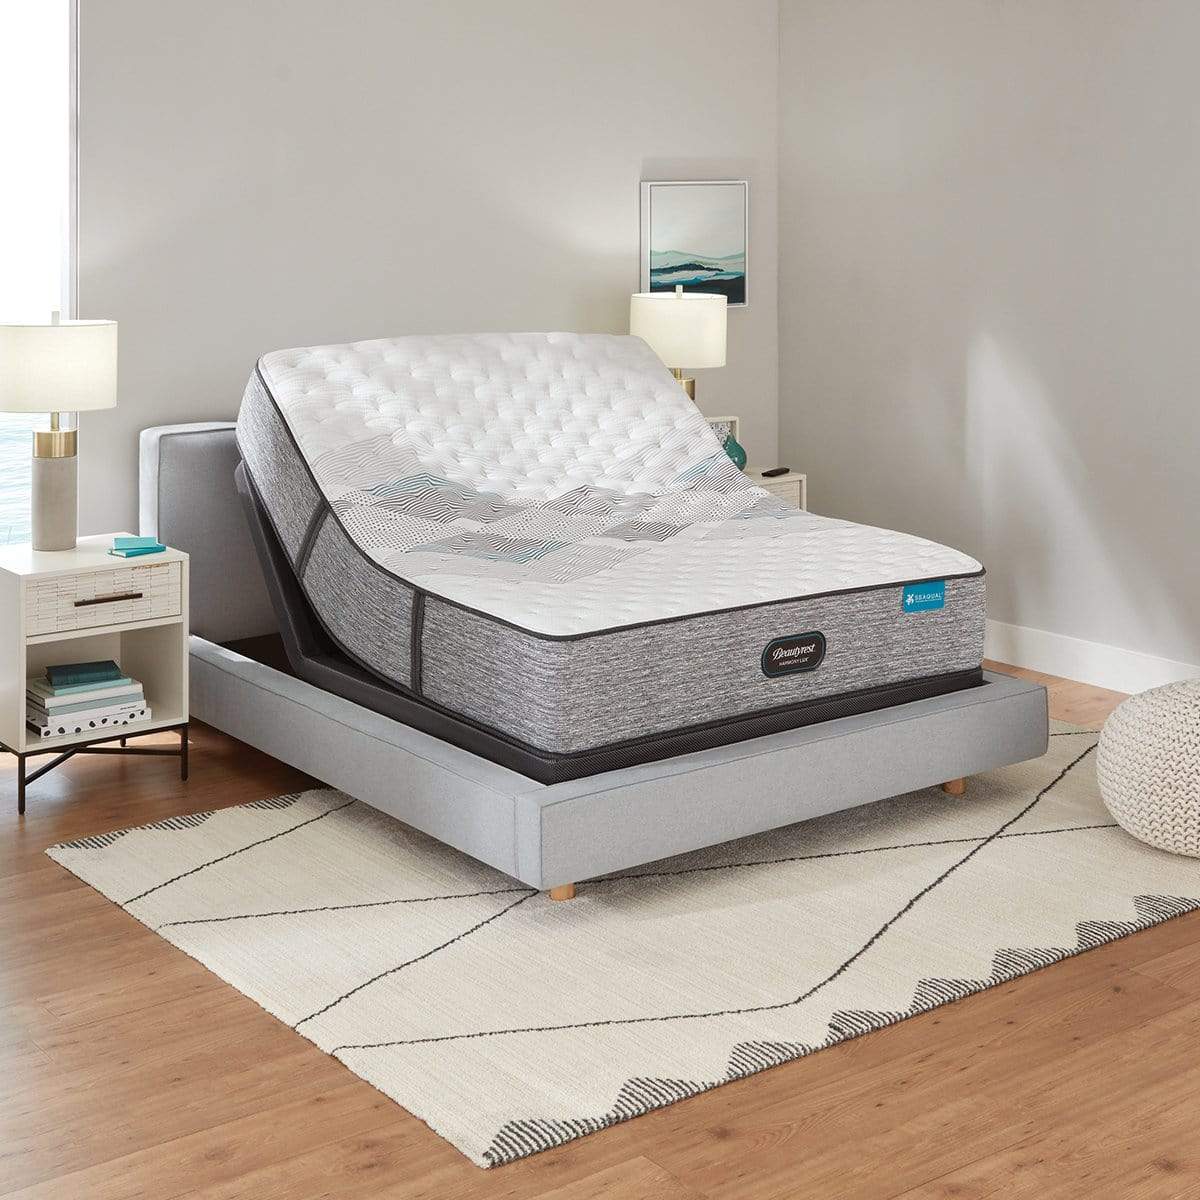 Beautyrest Harmony Lux Extra Firm Mattress In Bedroom On Adjustable Base